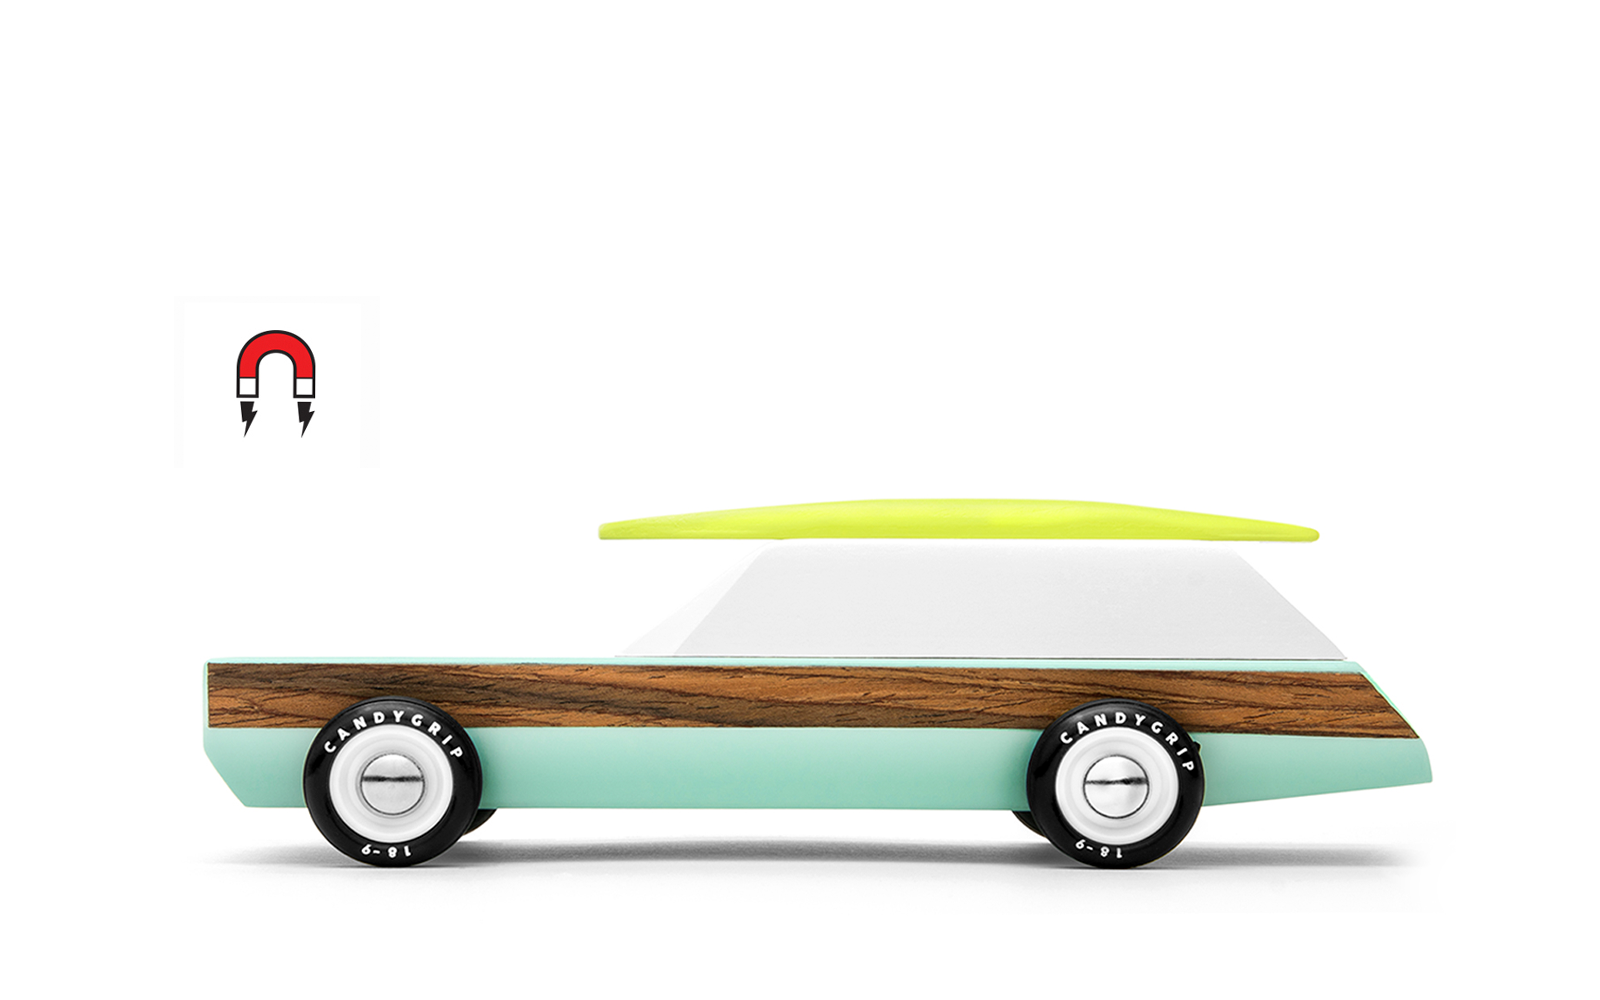 The famous classic, now in a boxier 80's vibe. With real veneer-paneled sides and a magnet embedded in the roof, it comes with a surfboard that snaps onto it. This car also features a magnetic tow hook - allowing it to hitch to our equally awesome trailer.